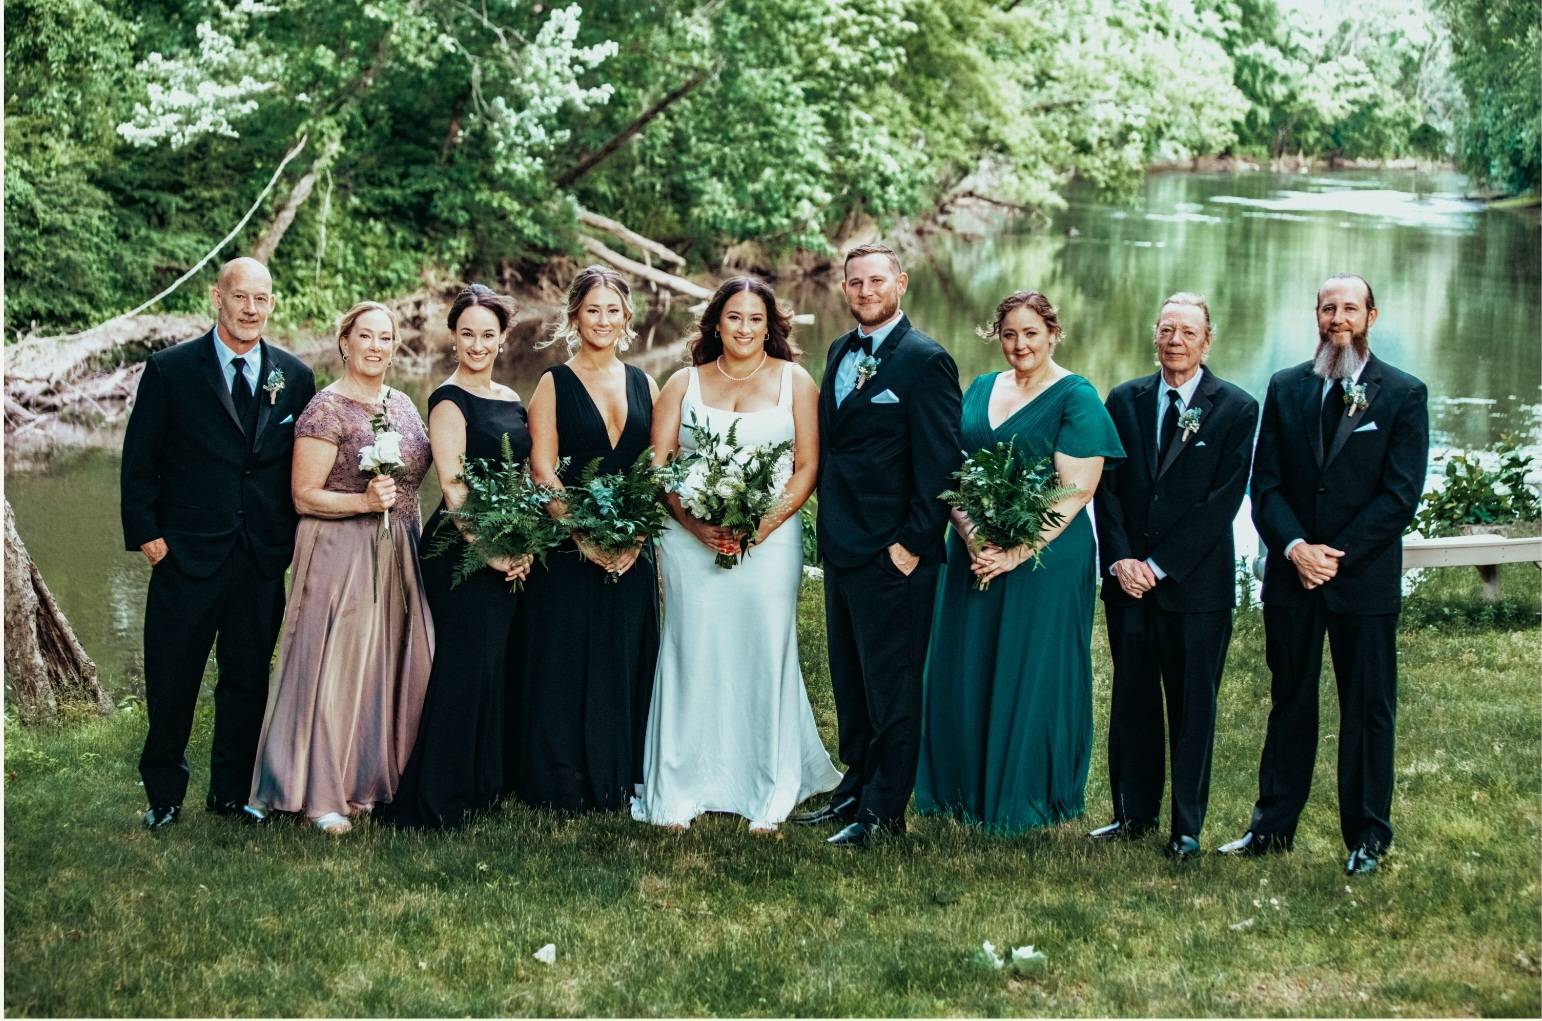 A group of man and women standing side by side to the bride.